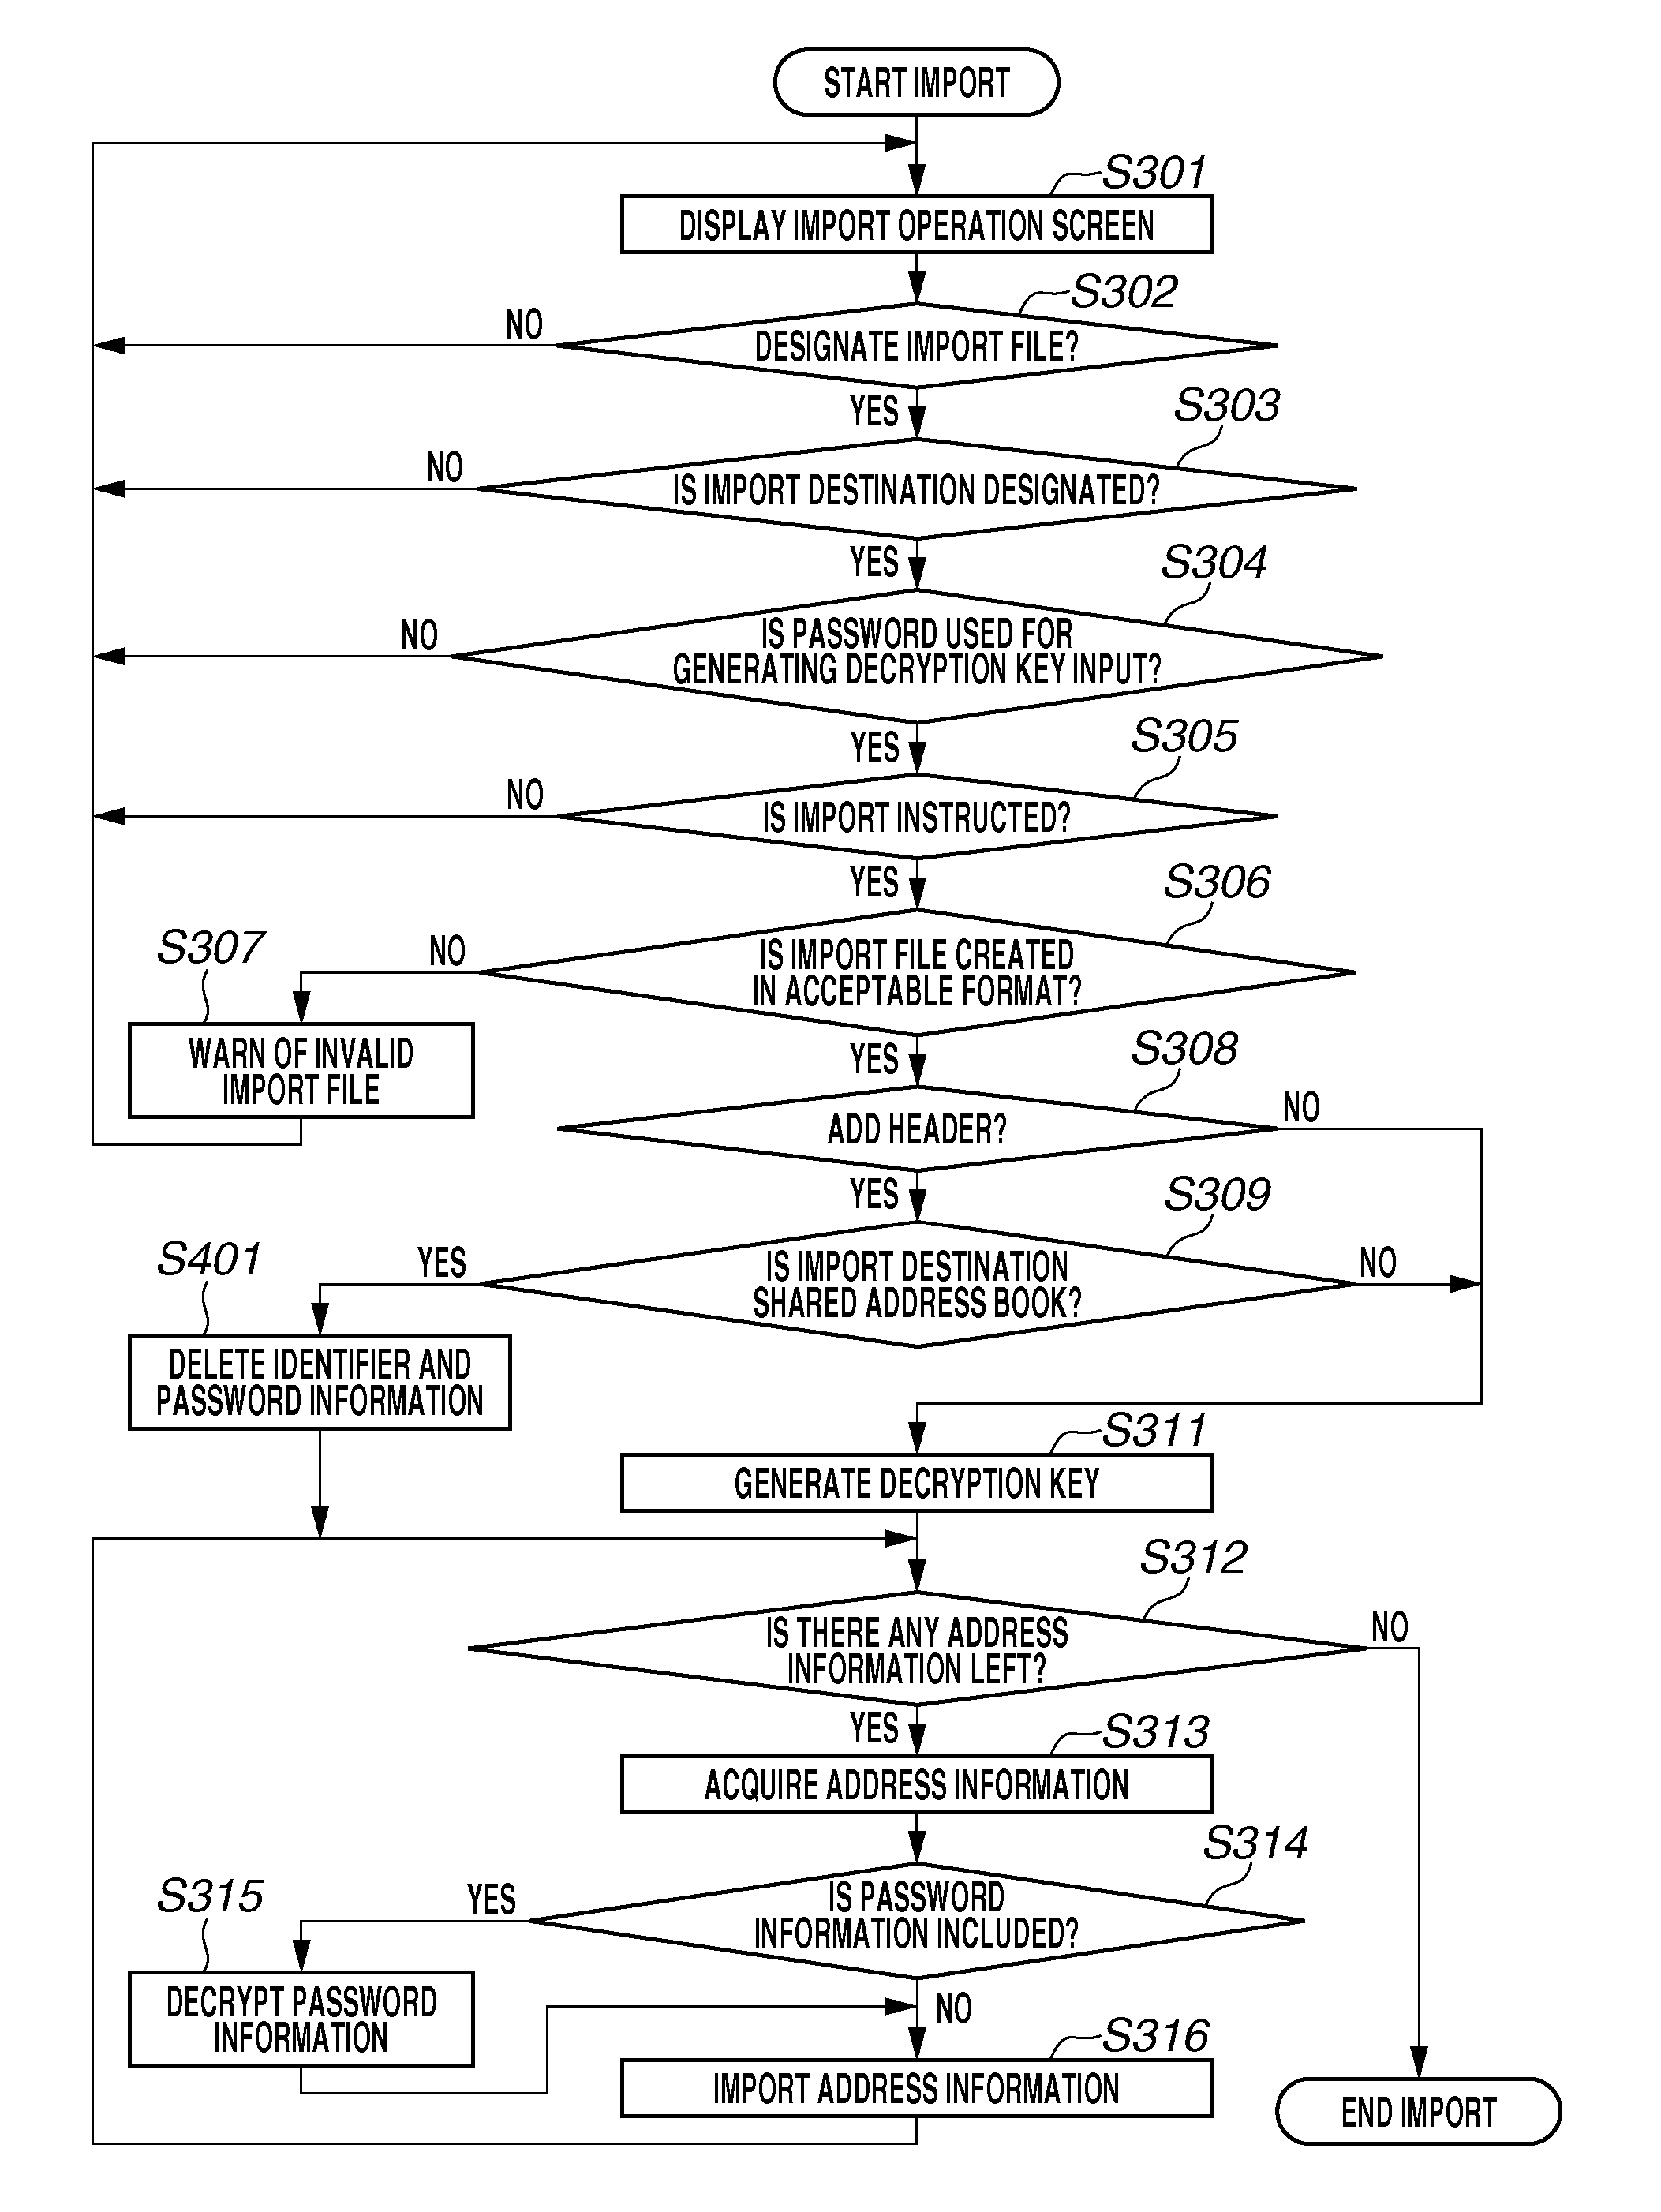 Control method of image communication apparatus, data distribution system, export apparatus, and import apparatus